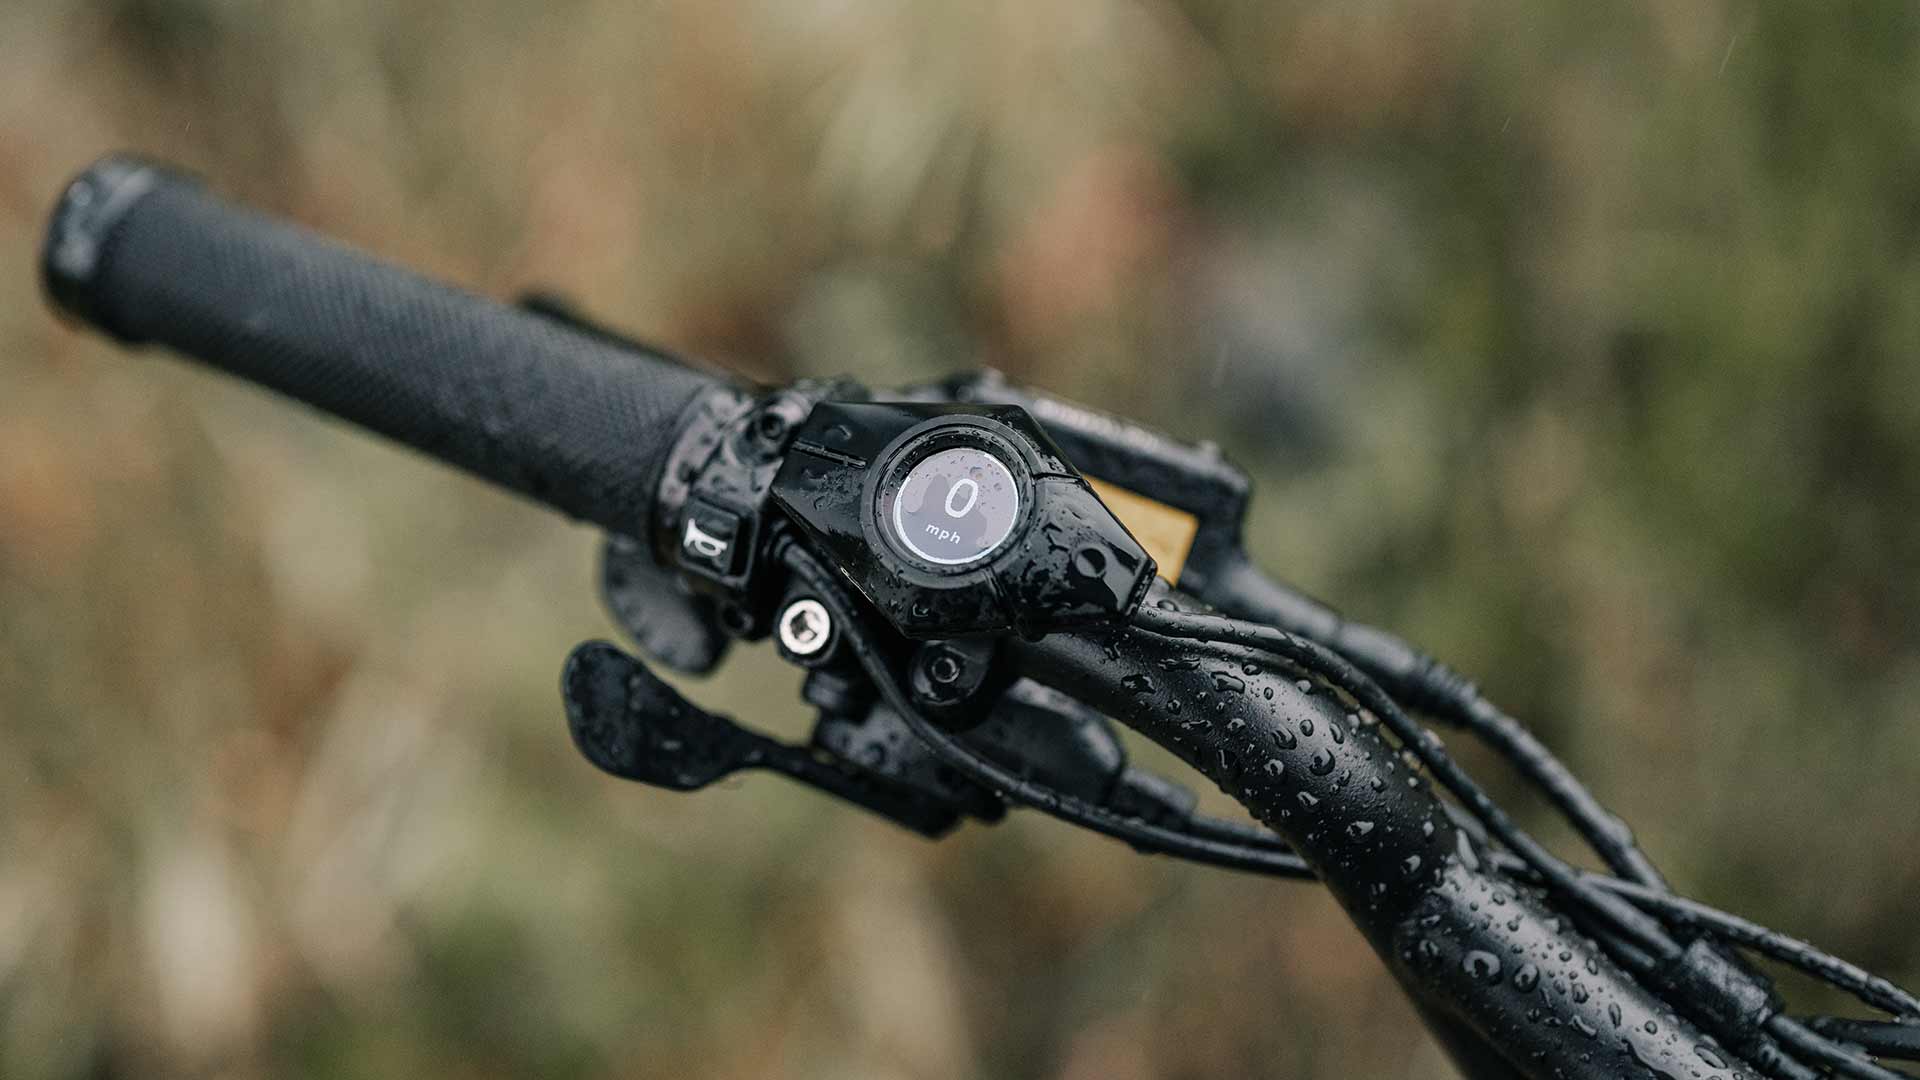 Closeup of the Super73-R Adventure Series ebike highlighting the smart display located on the handlebar